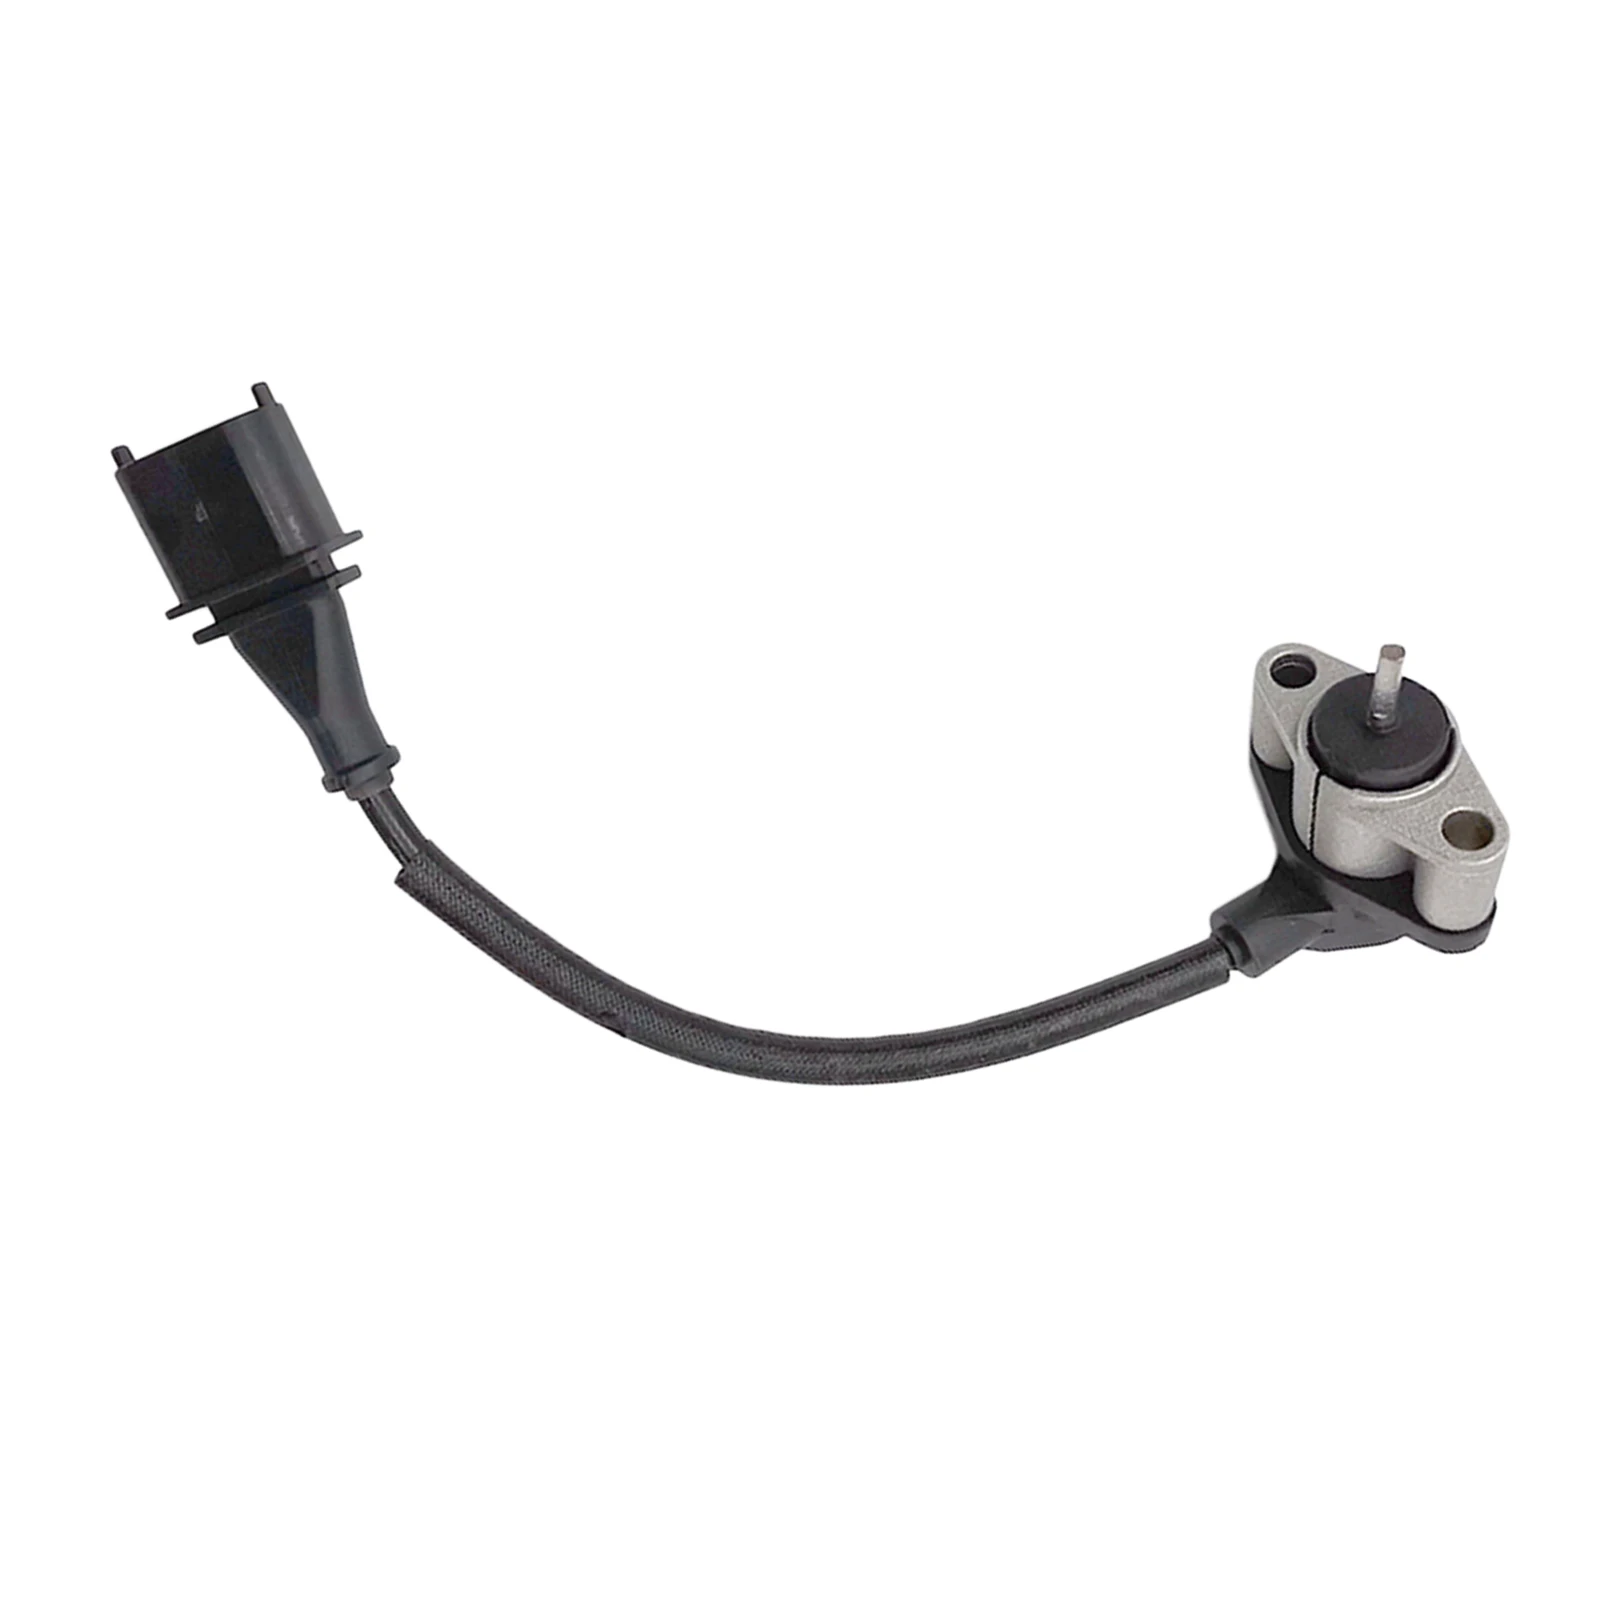 Crankshaft Position Sensor Fit for Land Rover Discovery Parts Replace